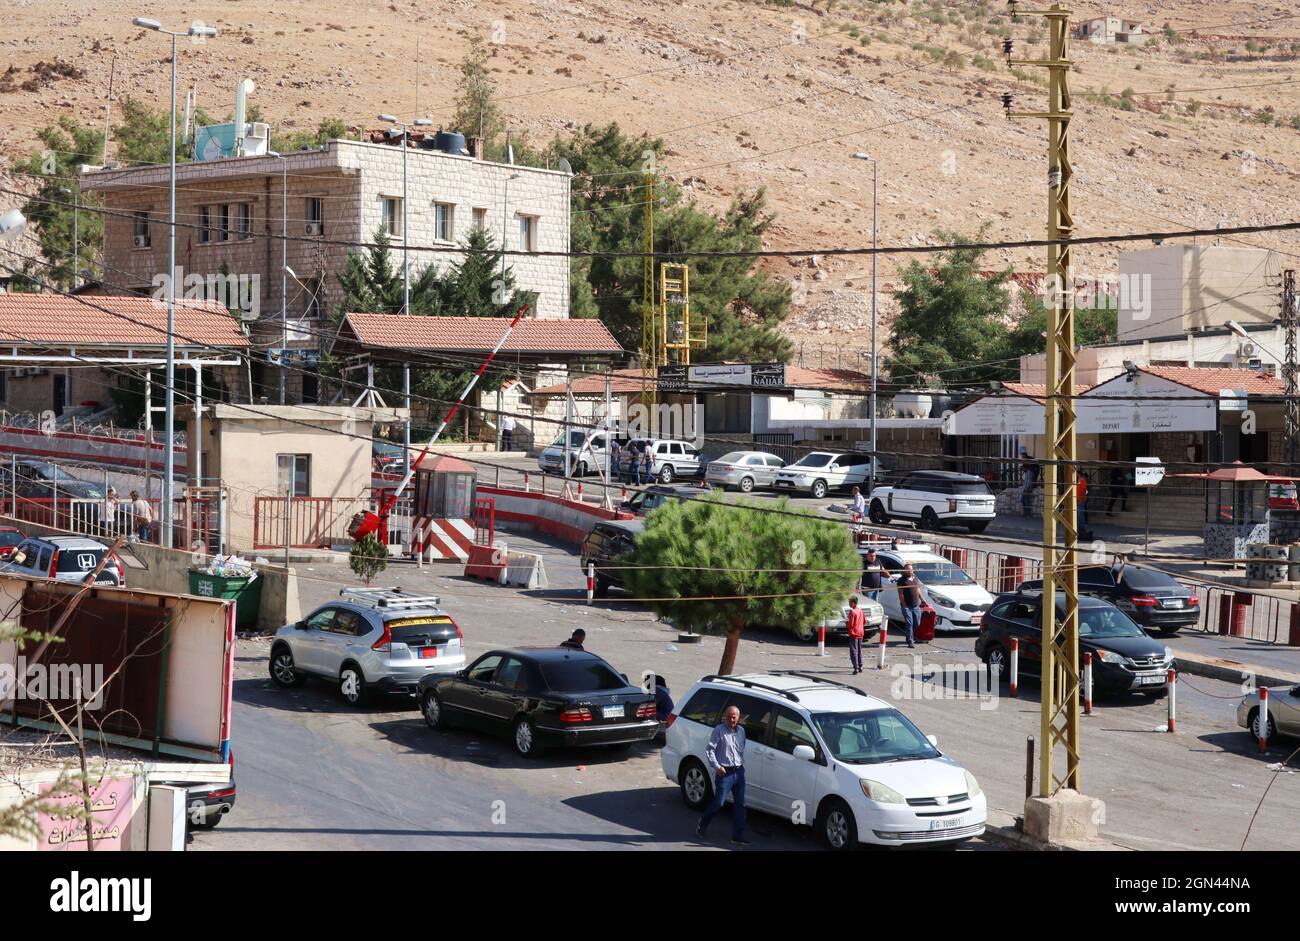 Masnaa border crossing checkpoint, Majdal Anjar, Bekaa Governorate, Lebanon, seen on September 21, 2021. Masnaa is an international authorized border crossing station between Lebanon and Syria. Lebanon has four official crossing checkpoints on Syrian border: Arida, Aboudieh, Ka'a and Masna'a. The Lebanon/Syria border is 394 km (245 miles) long and runs from the Mediterranean coast in the North to the tripartite border with Israel in the South. The border region with Syria is widely affected by smuggling, illegal entries and the spillovers from the Syrian Civil War. (Elisa Gestri/ Sipa USA) Stock Photo